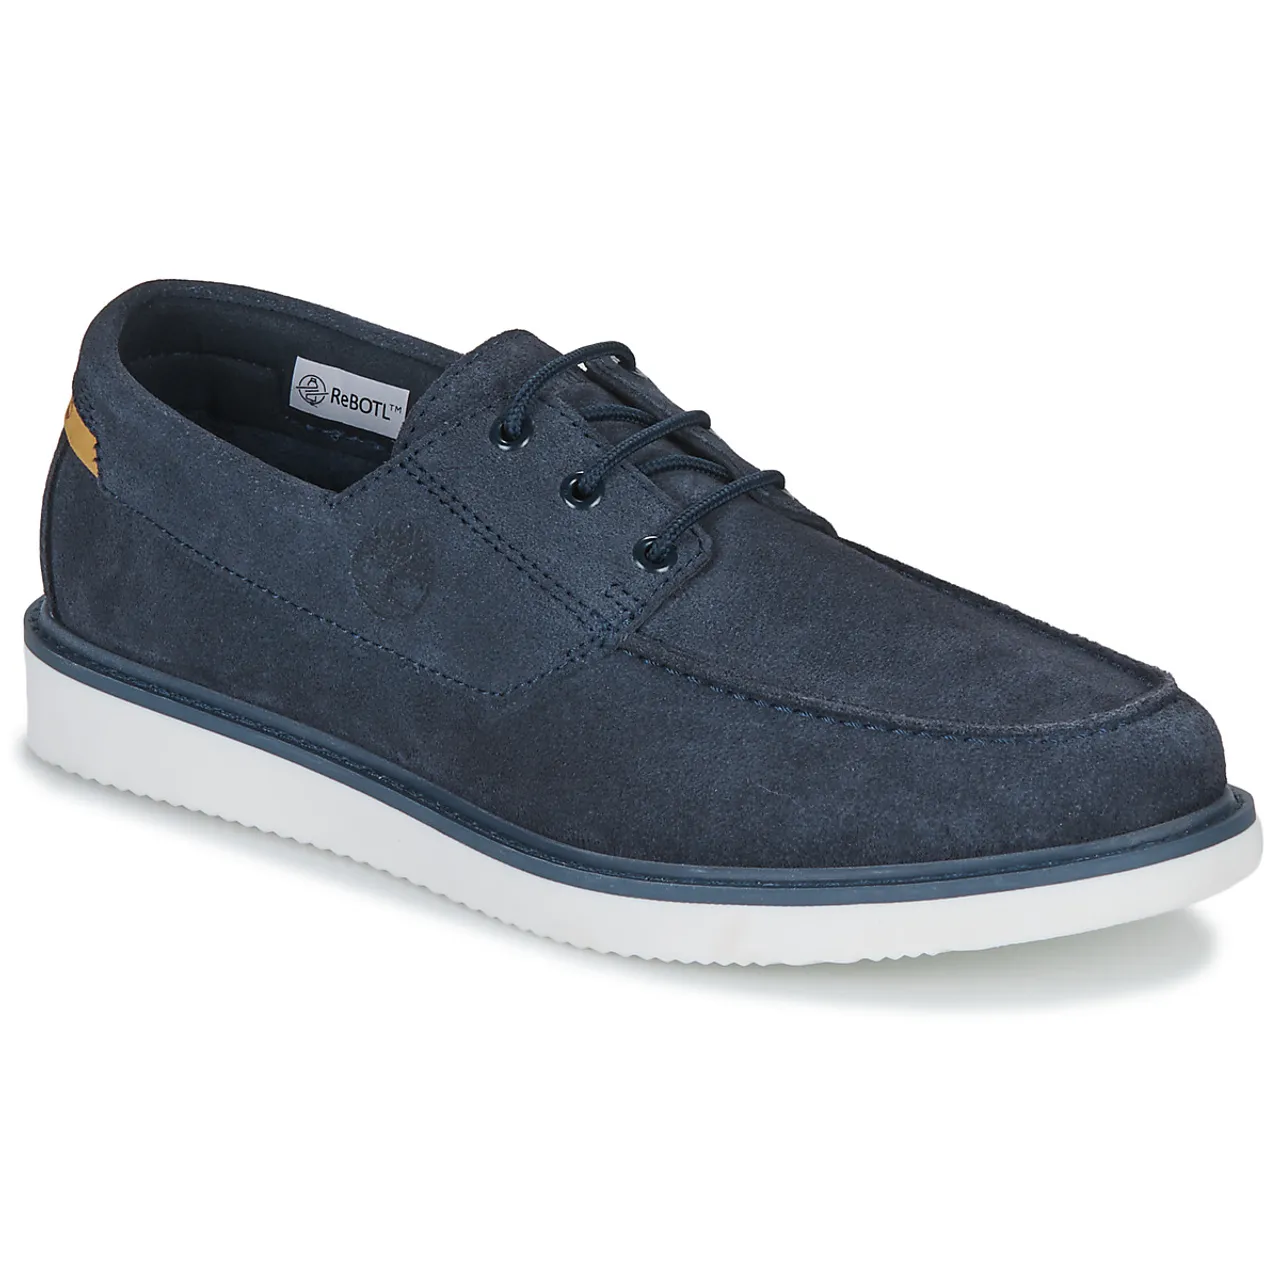 Timberland  NEWMARKET II LTHR BOAT  men's Boat Shoes in Marine